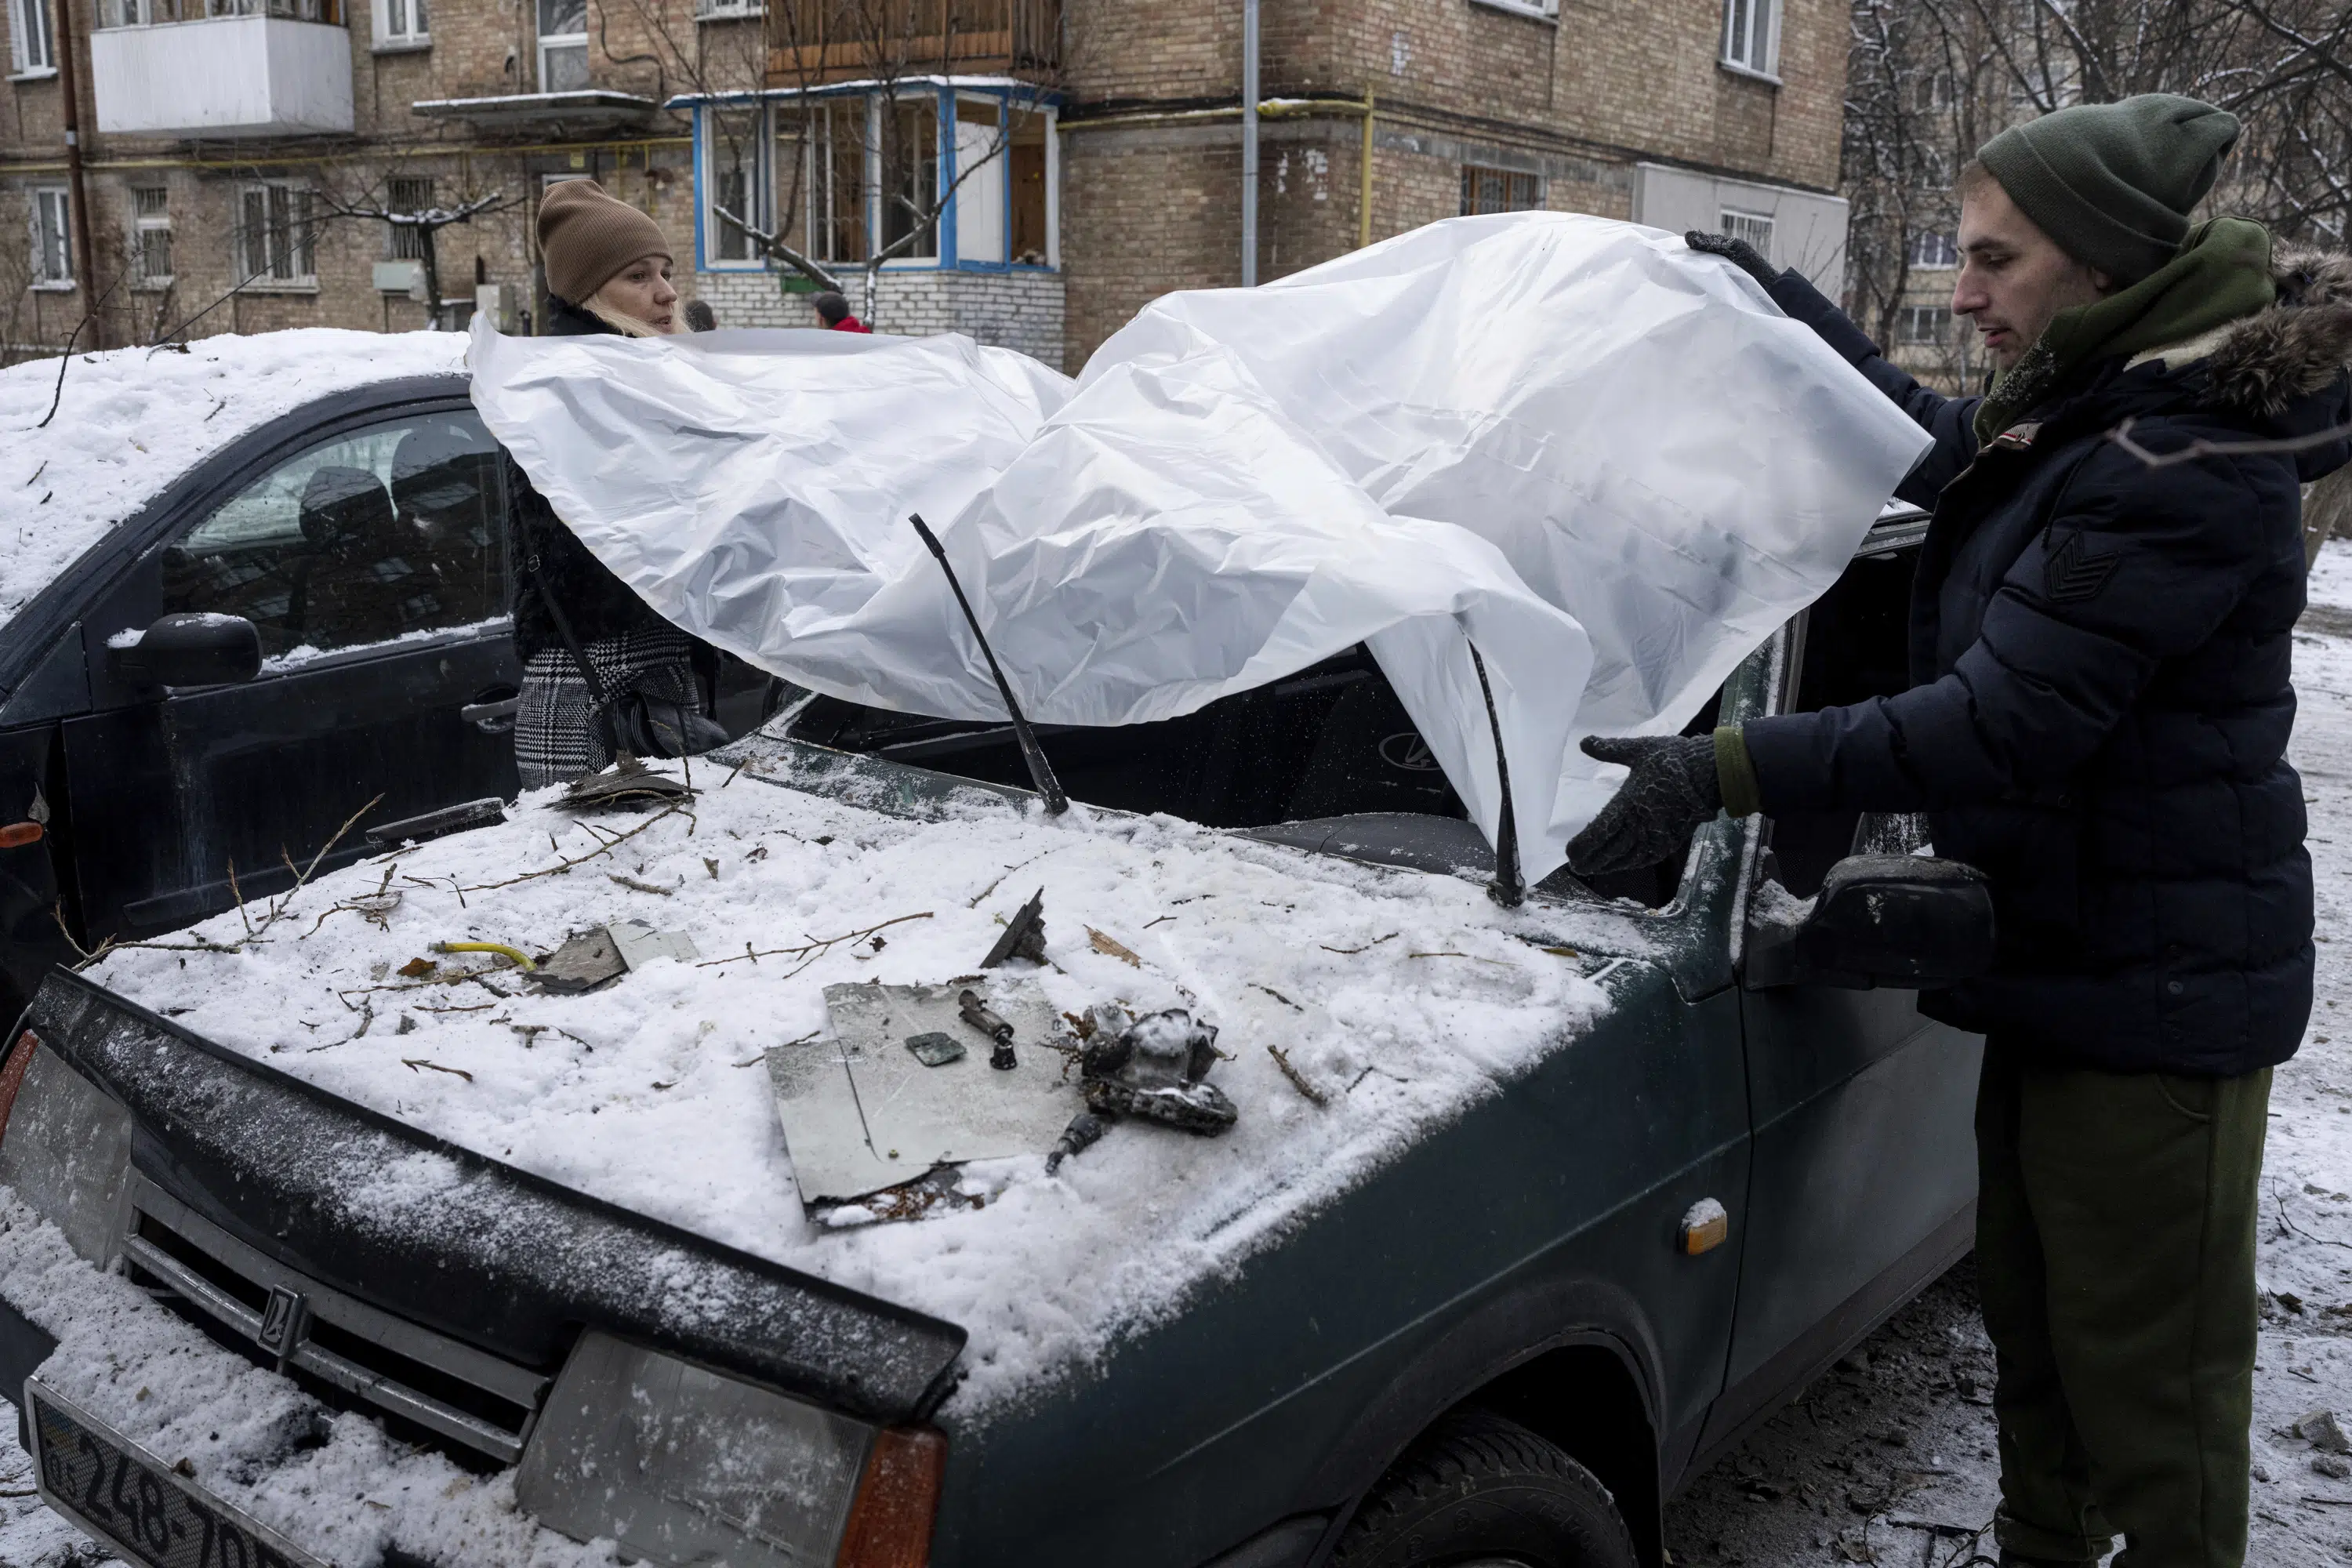 Ukraine: Russian strikes thwarted, wreckage hits buildings